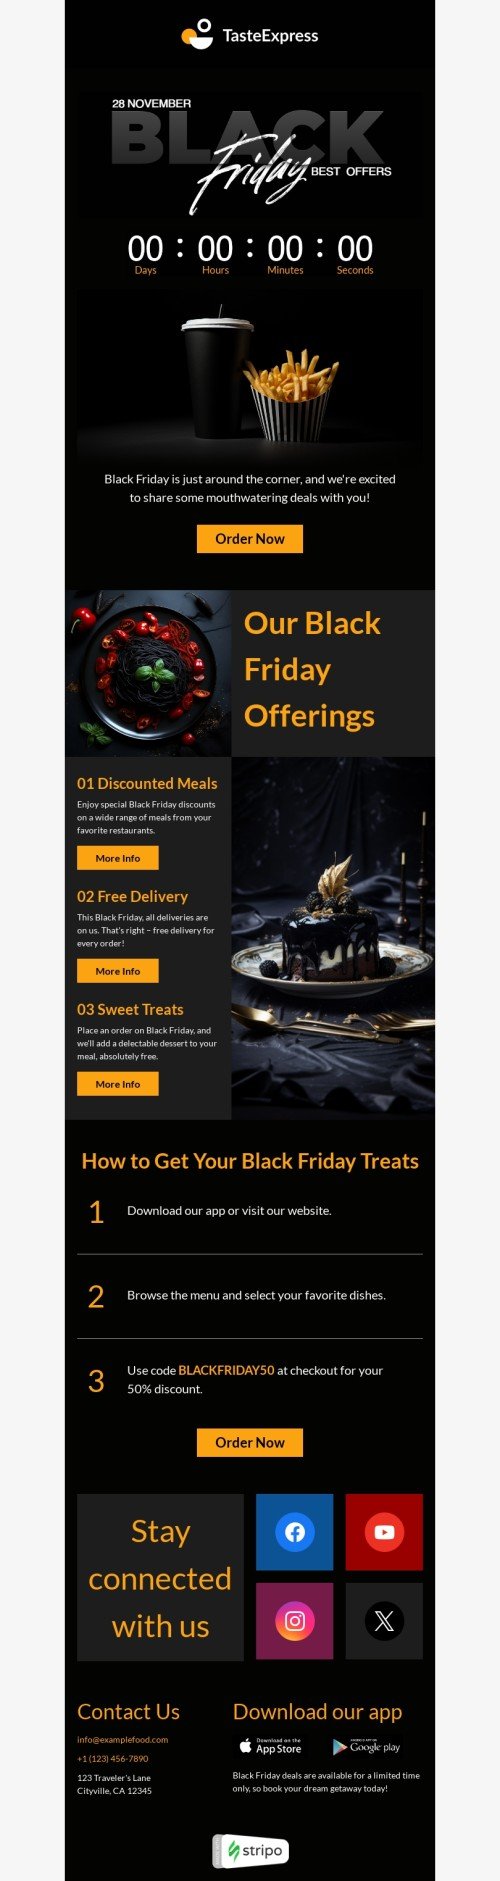 Black Friday email template "Unwrap delicious deals" for food industry mobile view